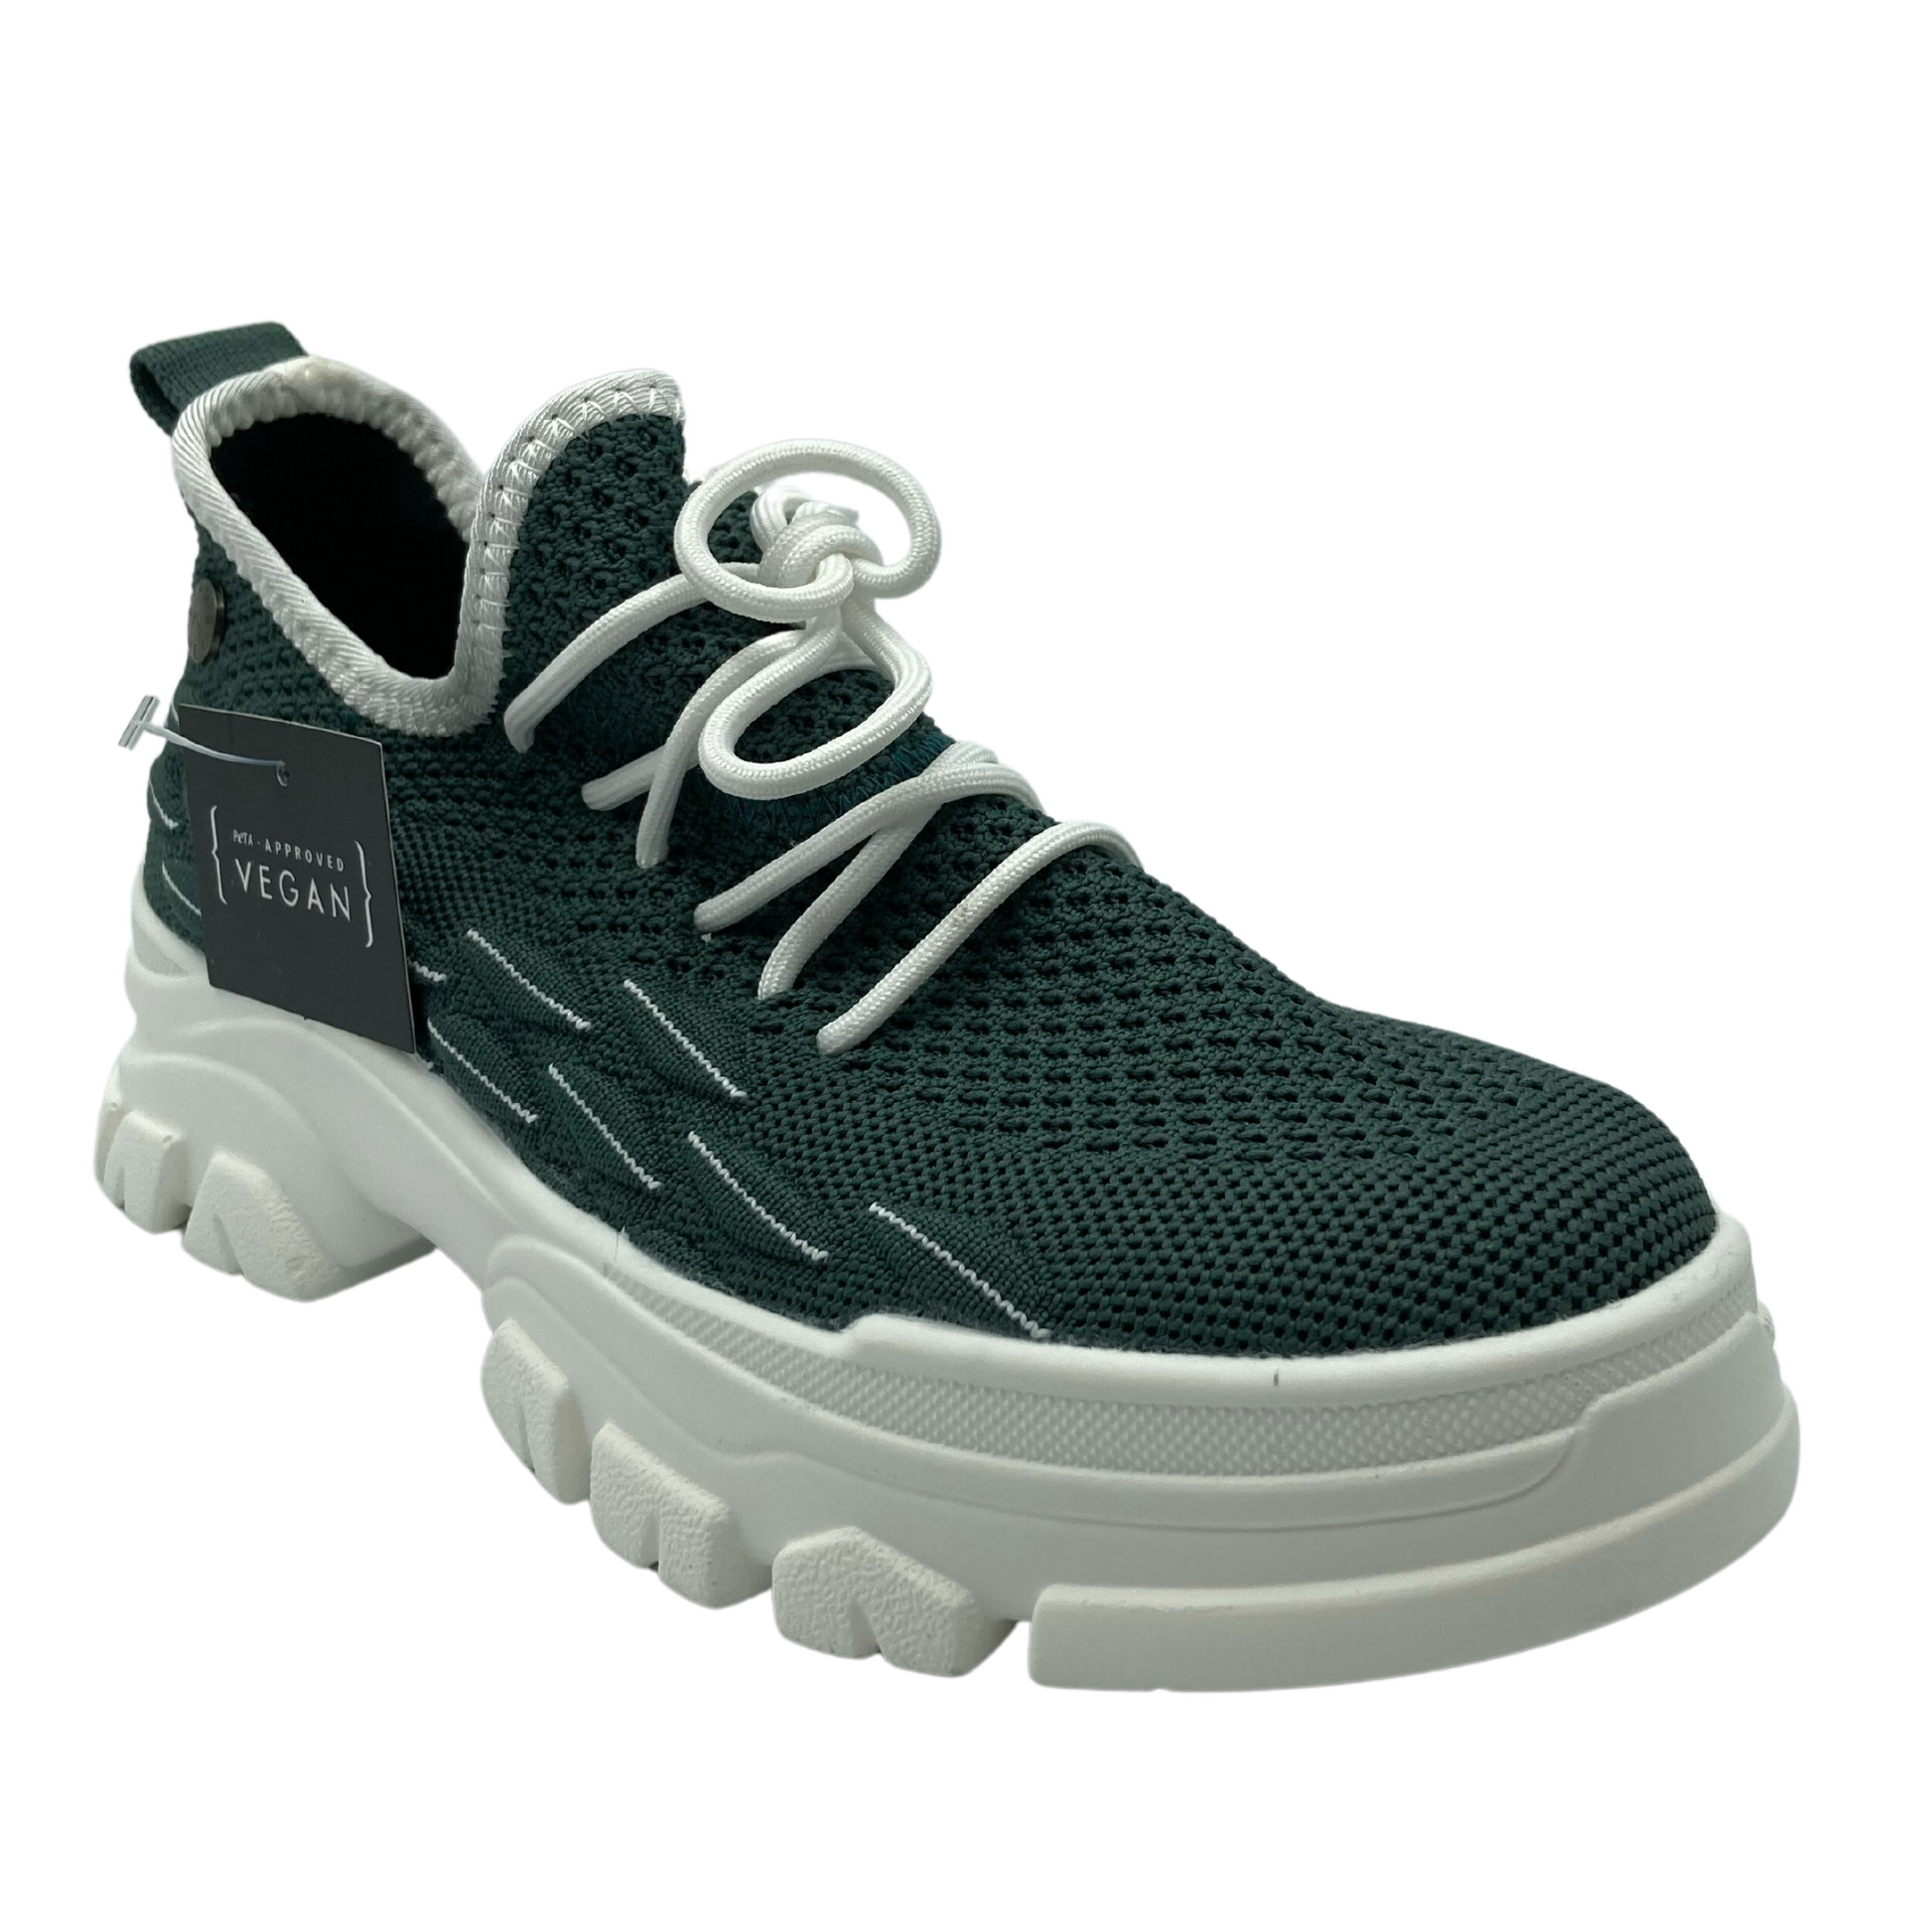 45 degree angled view of pine green mesh sneaker with white rubber platform sole